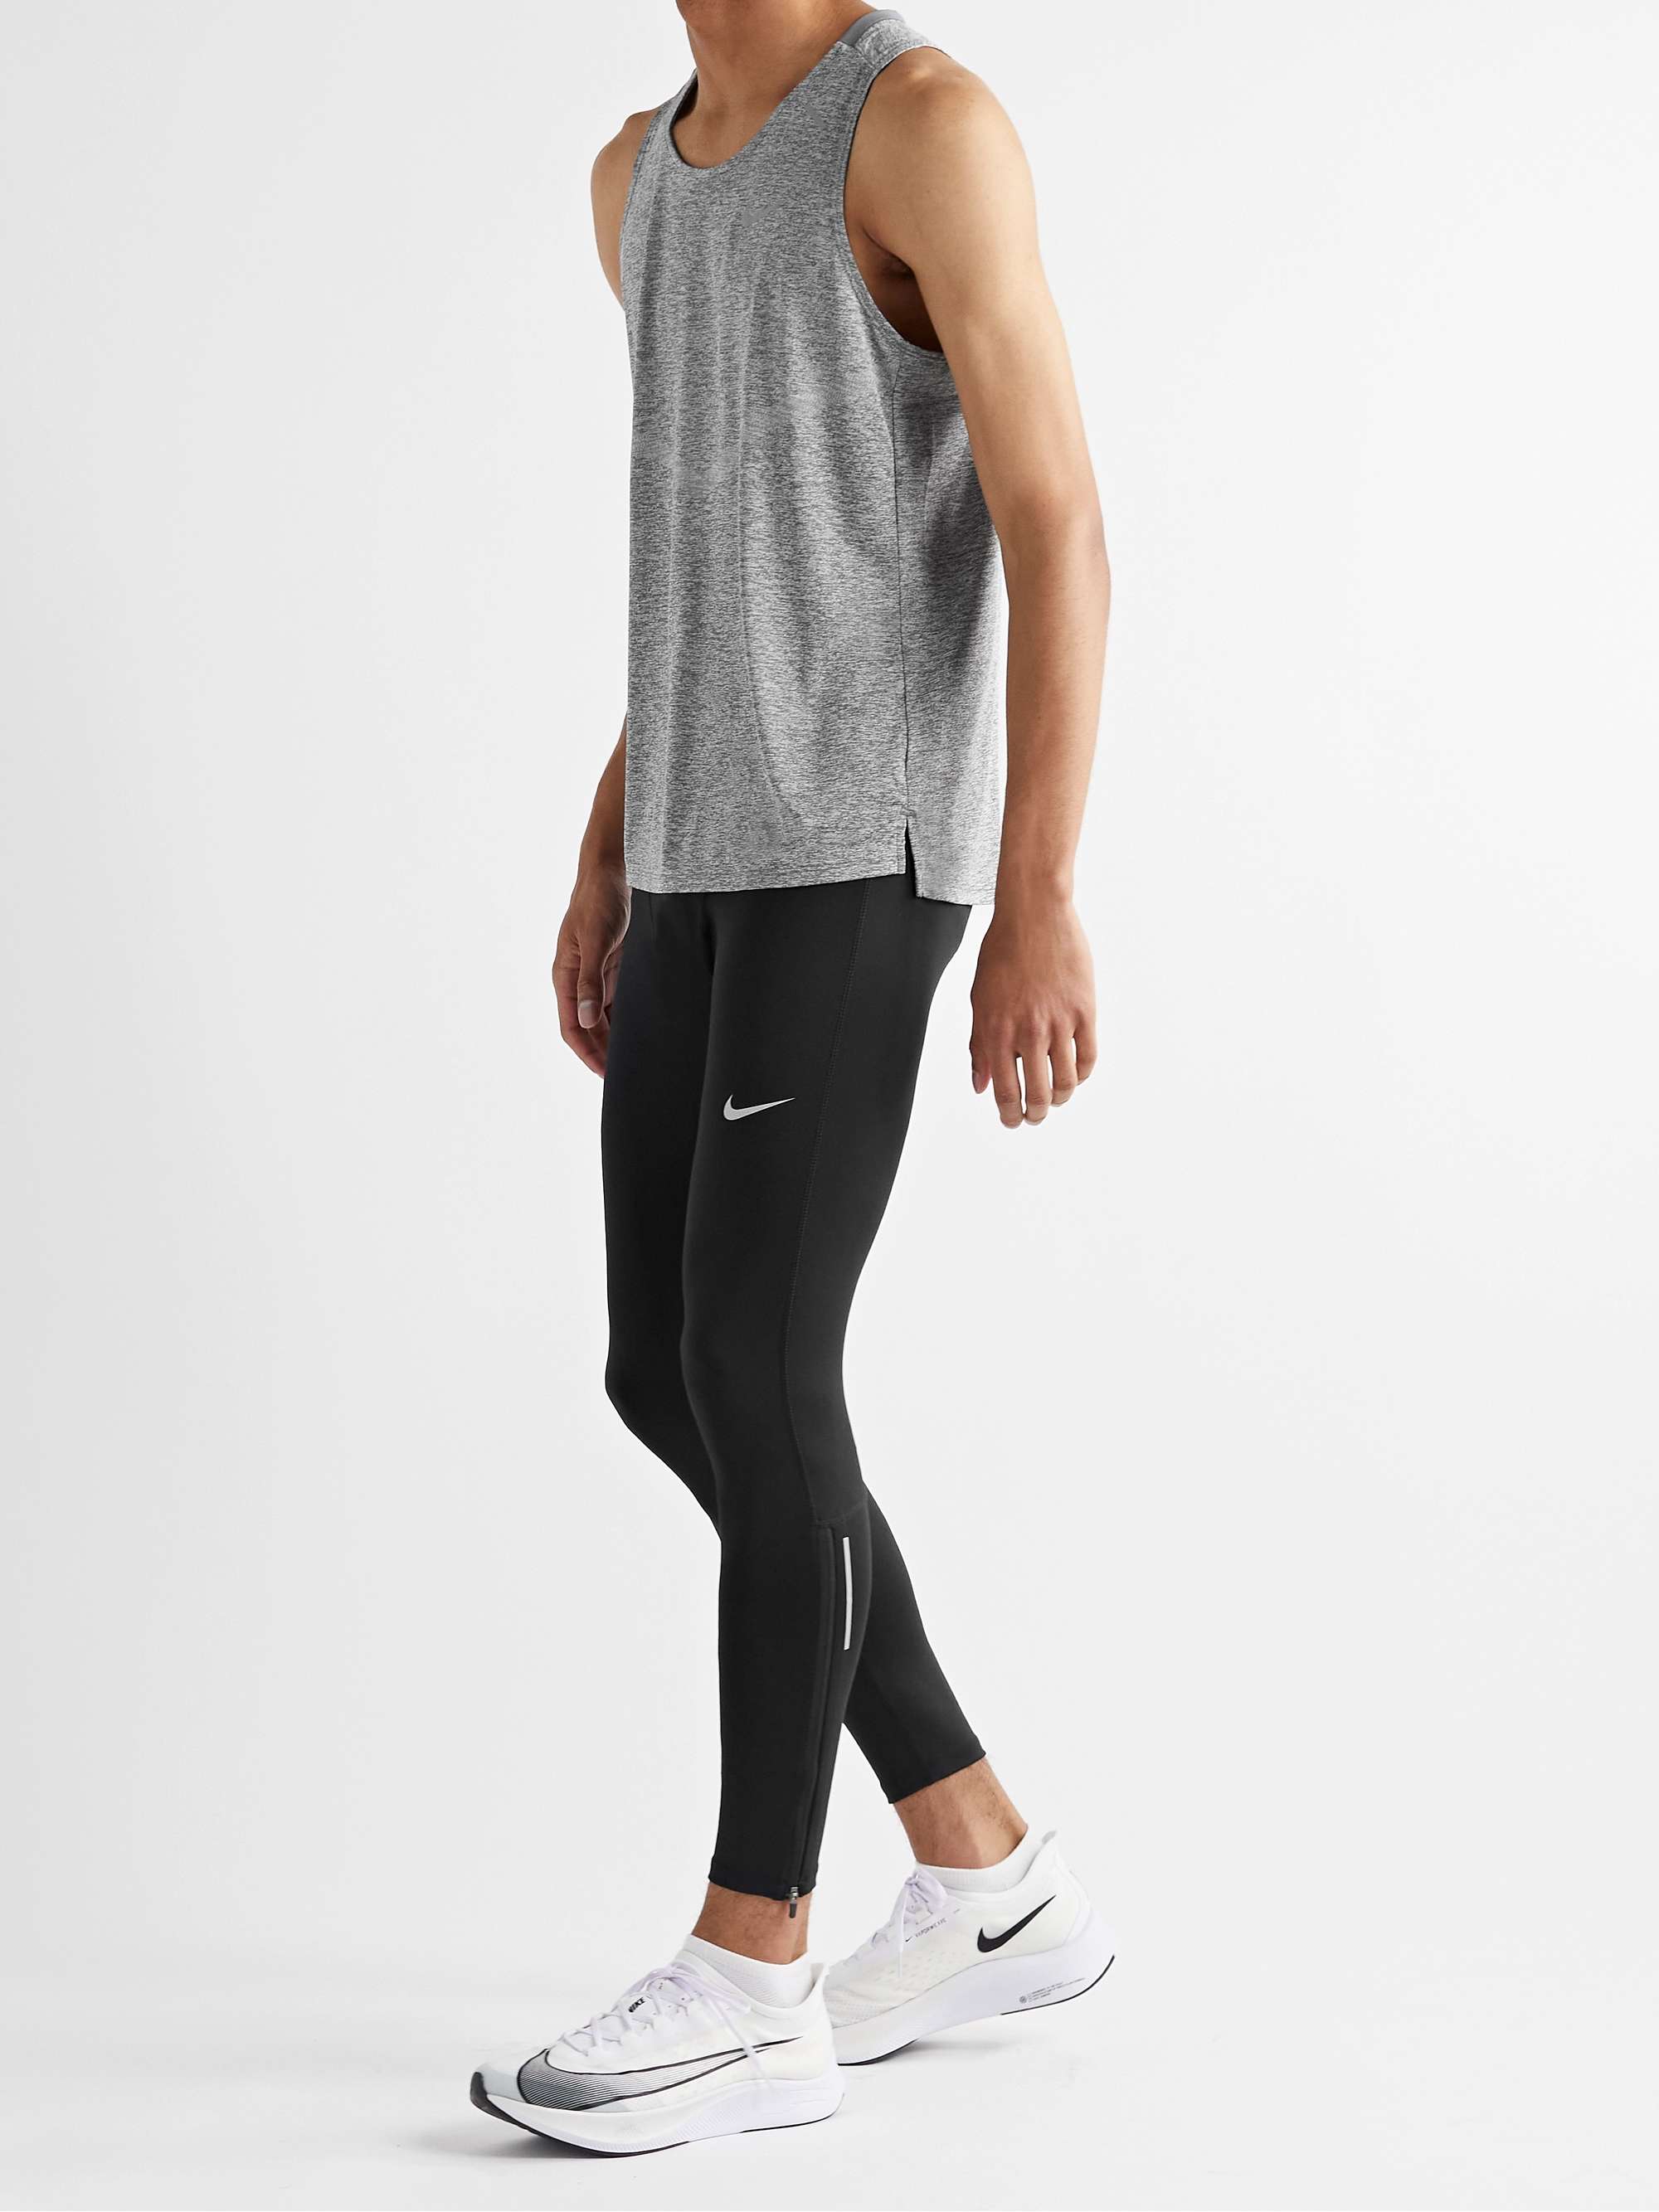 NIKE RUNNING Rise 365 Recycled Dri-FIT Tank Top for Men | MR PORTER